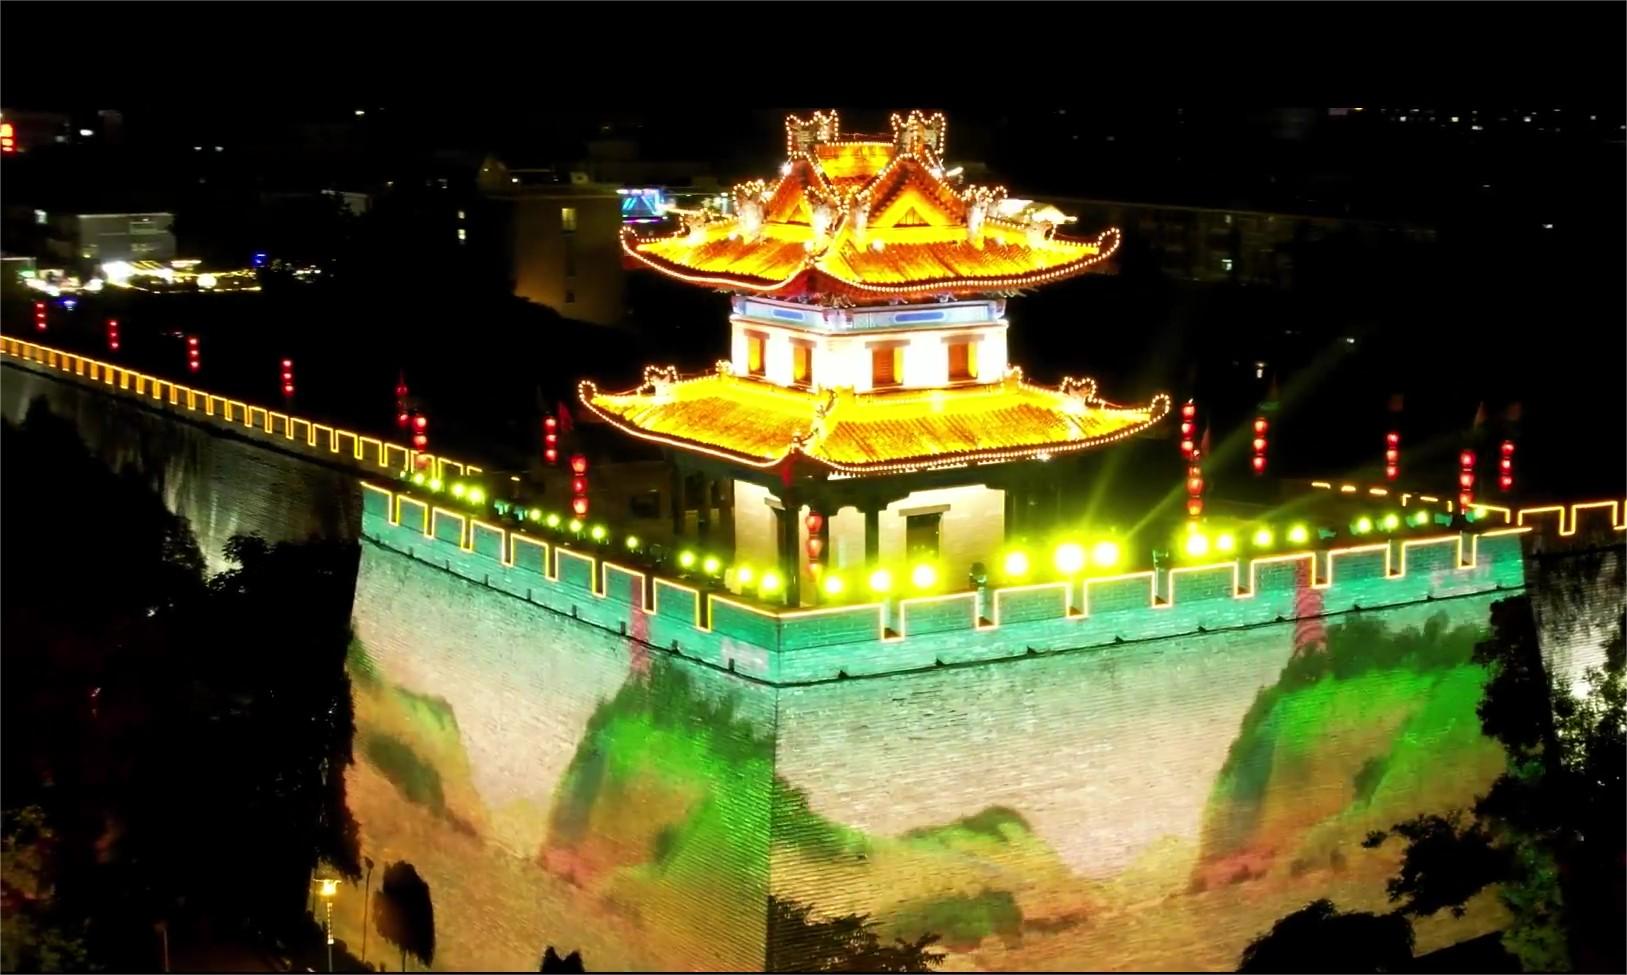 Light show projected onto ancient city walls in Xi'an